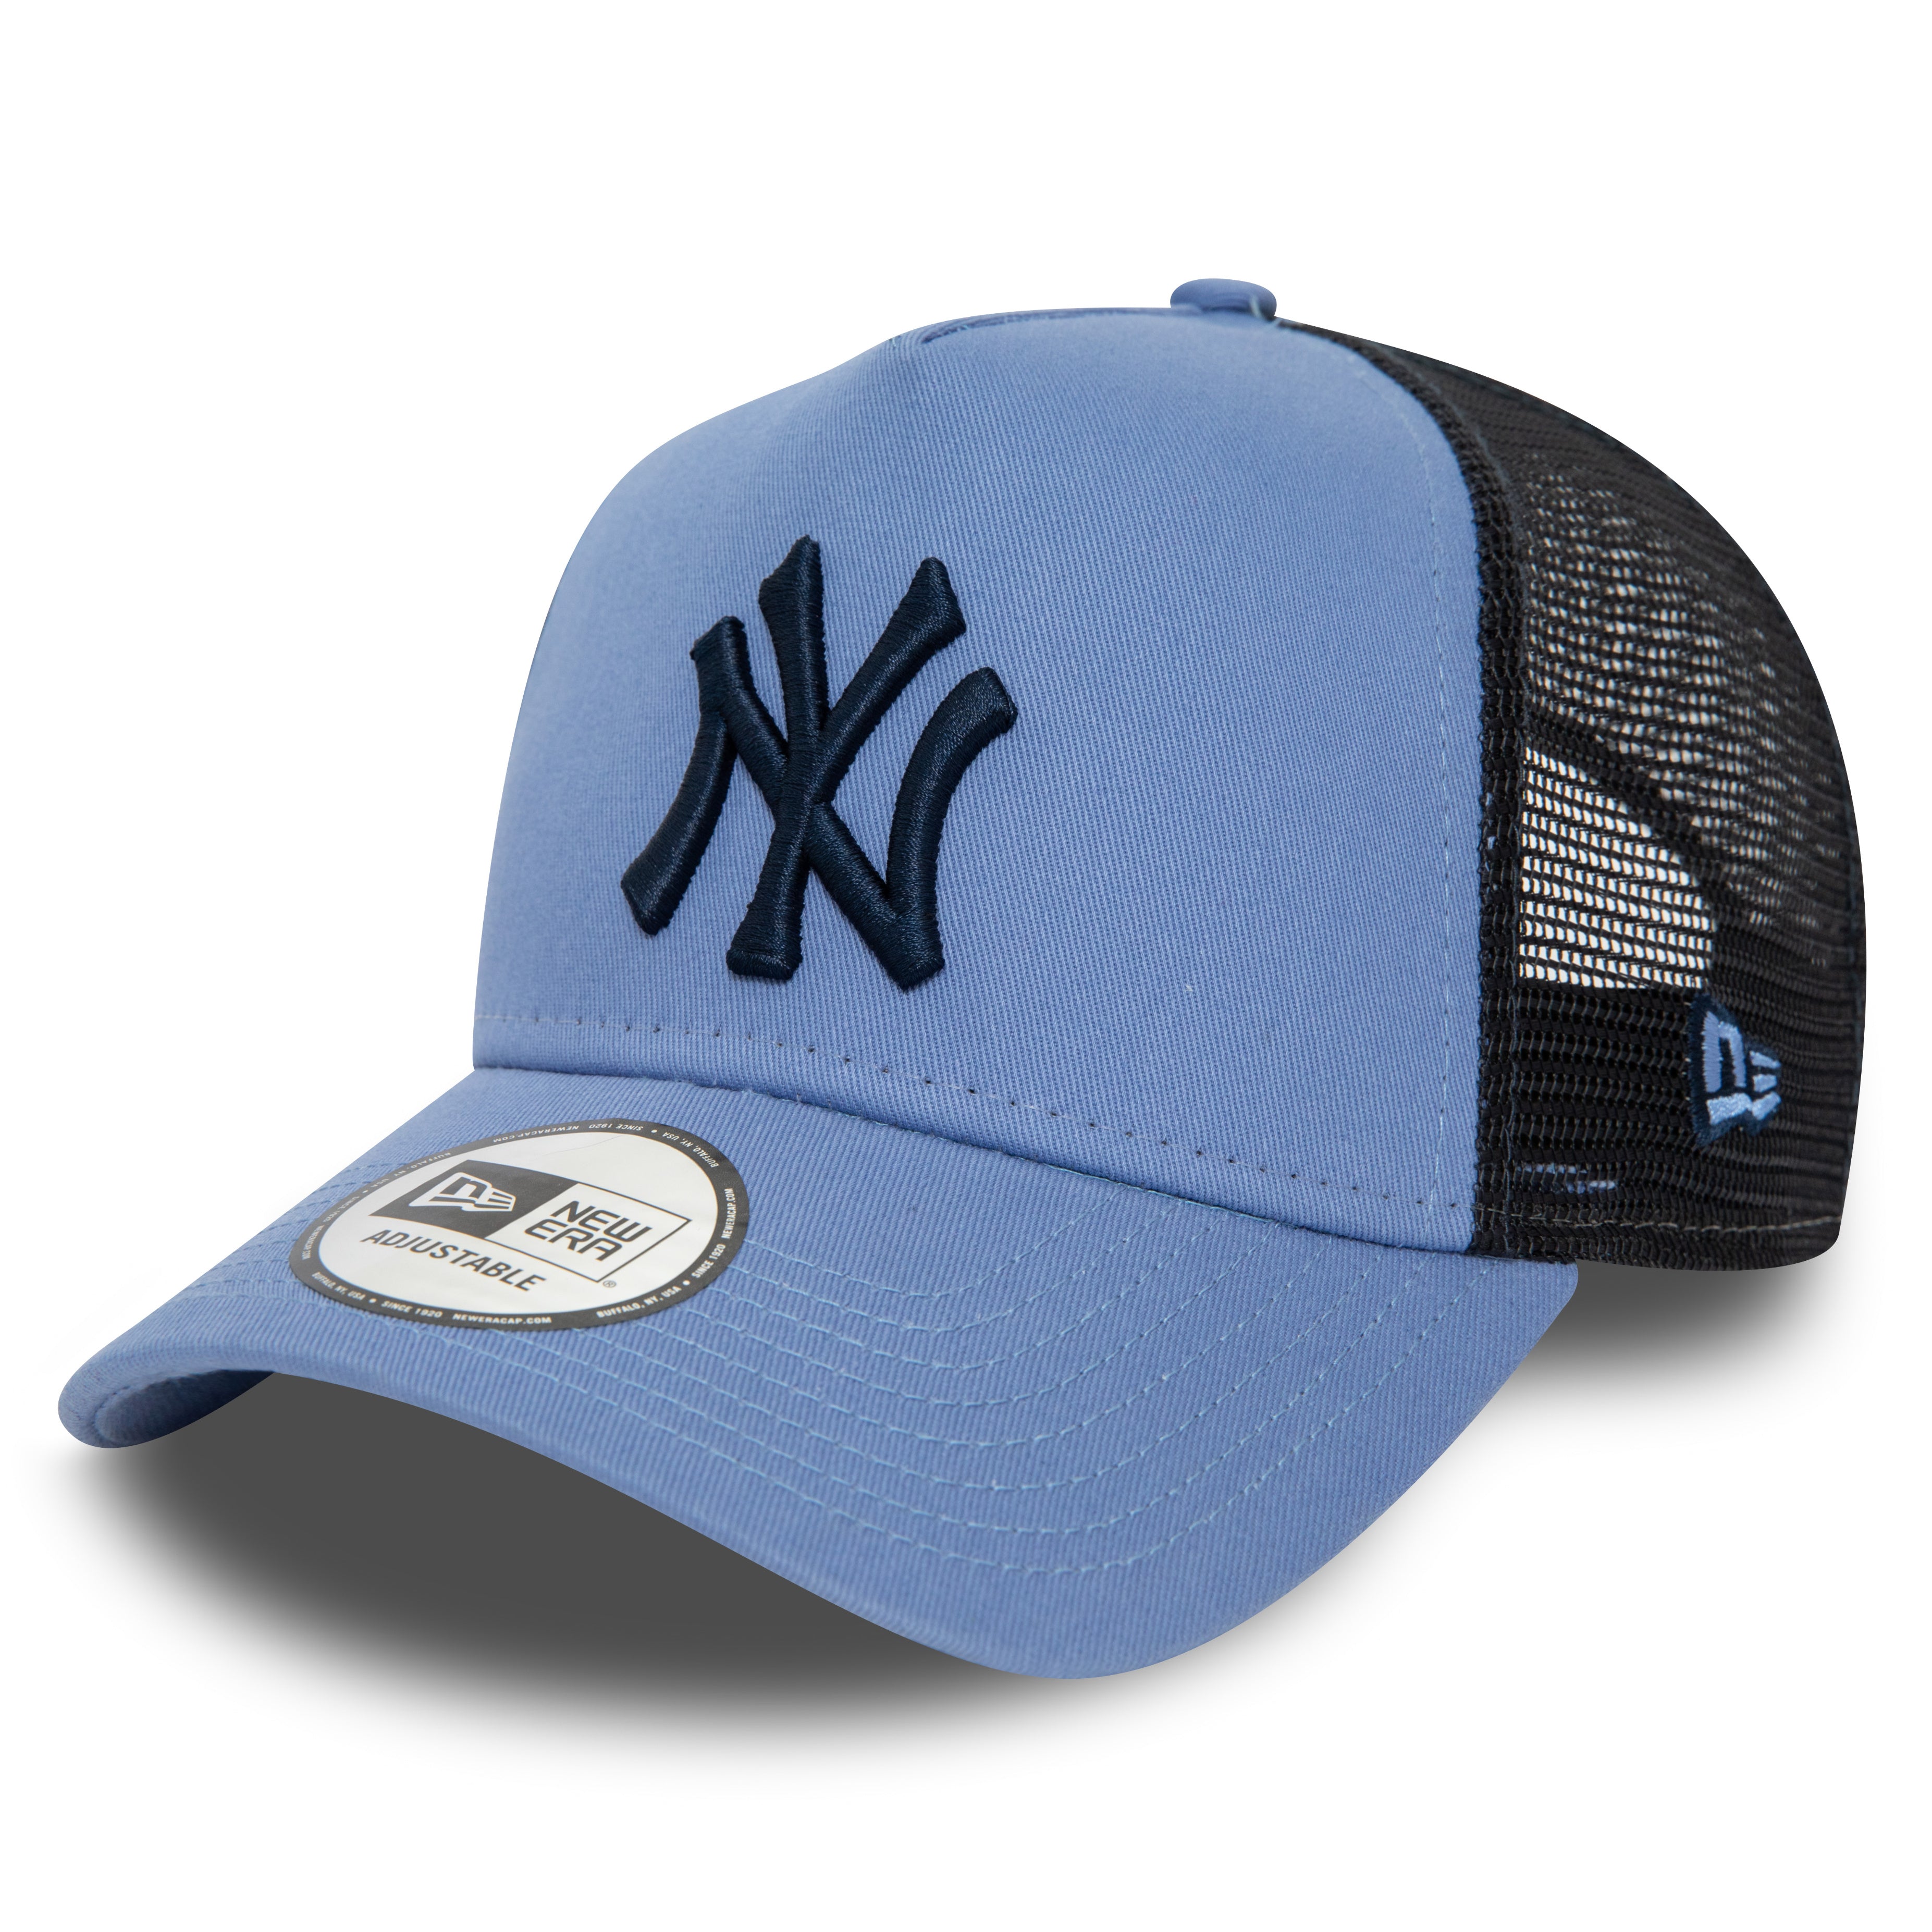 NEW ERA 9FORTY MLB LEAGUE ESSENTIAL NEW YORK YANKEES A-FRAME MED BLUE TRUCKER